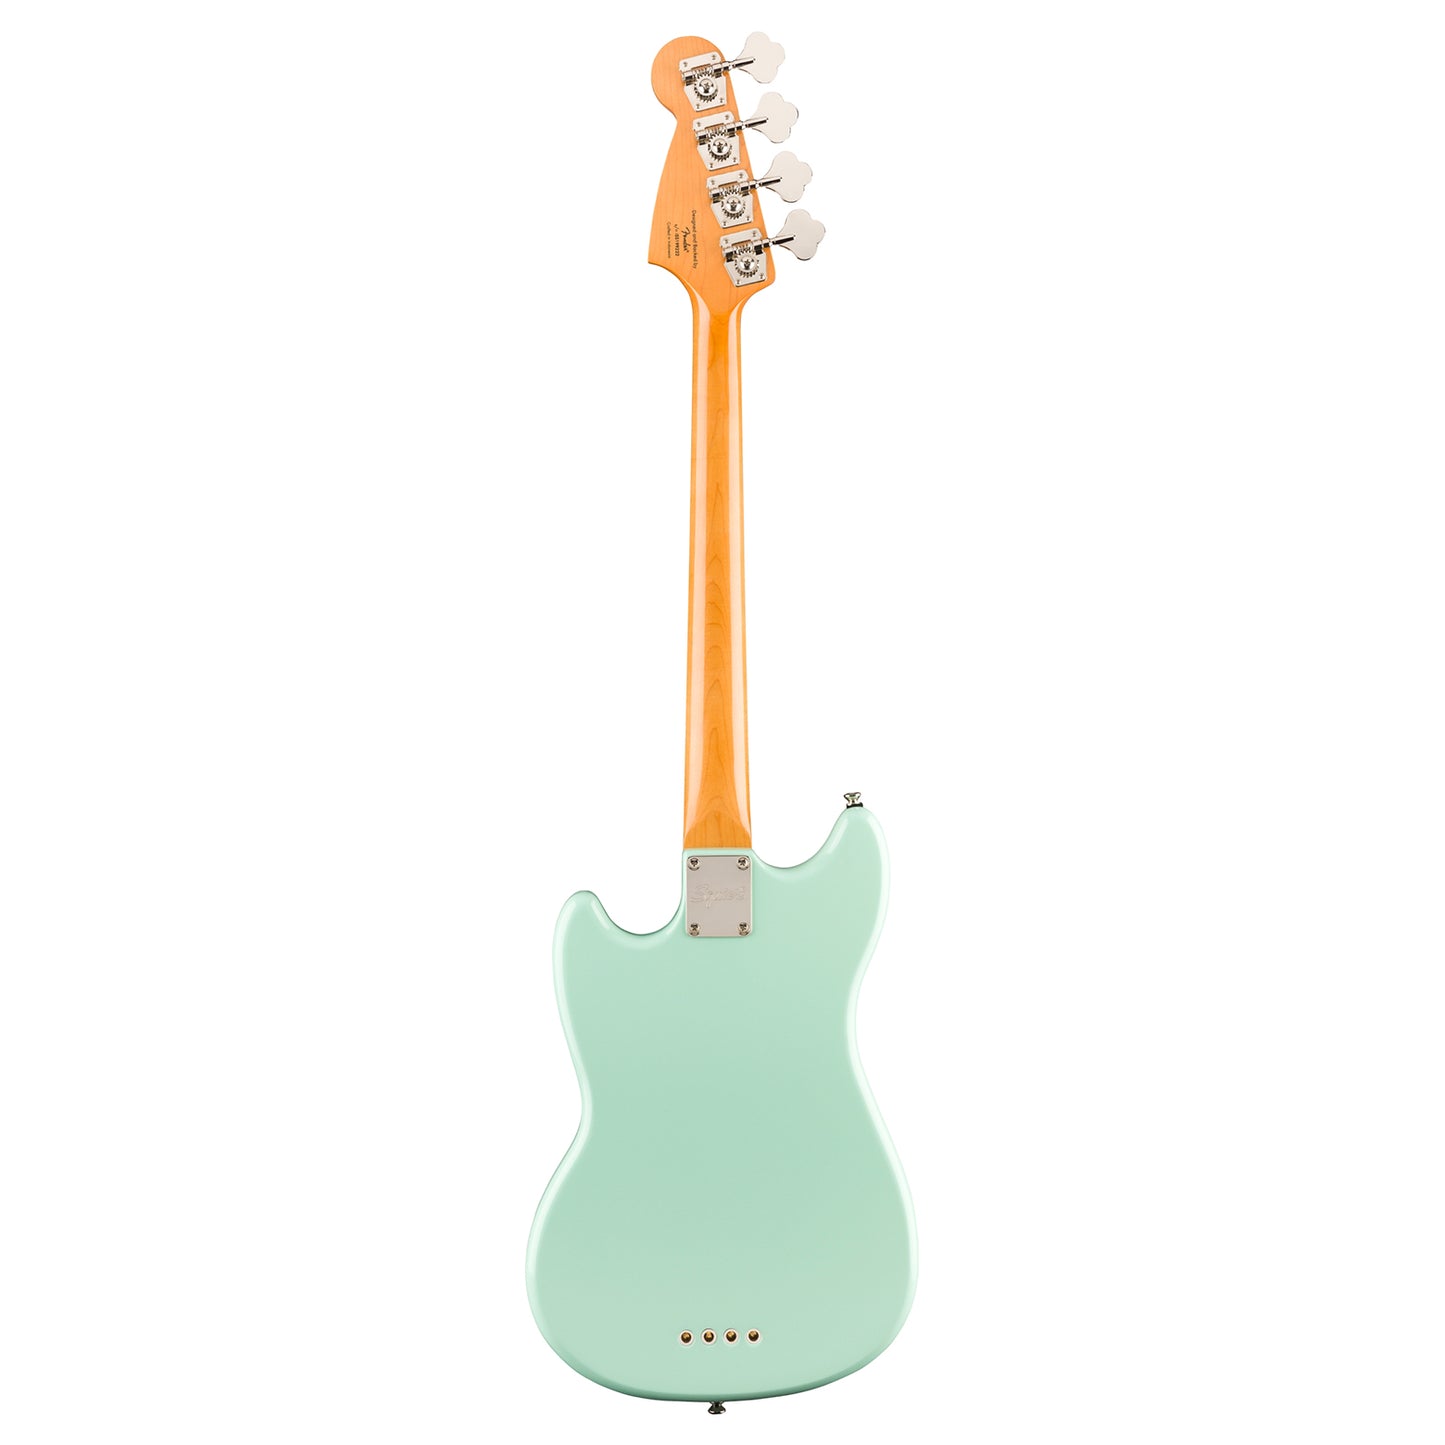 Squier by Fender Classic Vibe '60s Mustang Bass Electric Guitar Vintage Style LRL with Split Coil Pickup, Nickel Plated Hardware (White, Green)